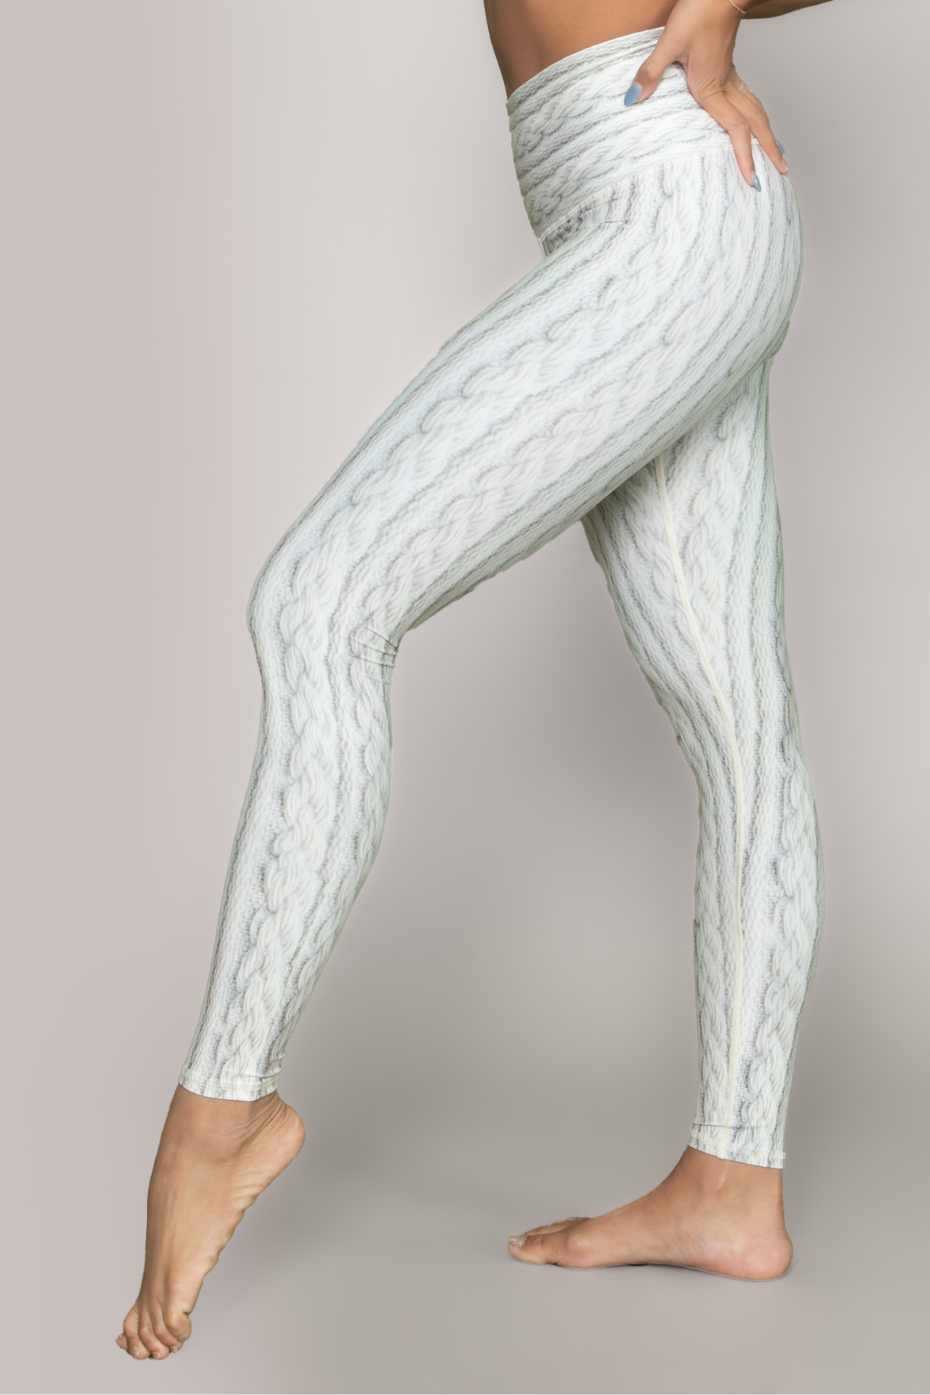 Cookie's Cable Knit Tights (Sizes 1 – 18)